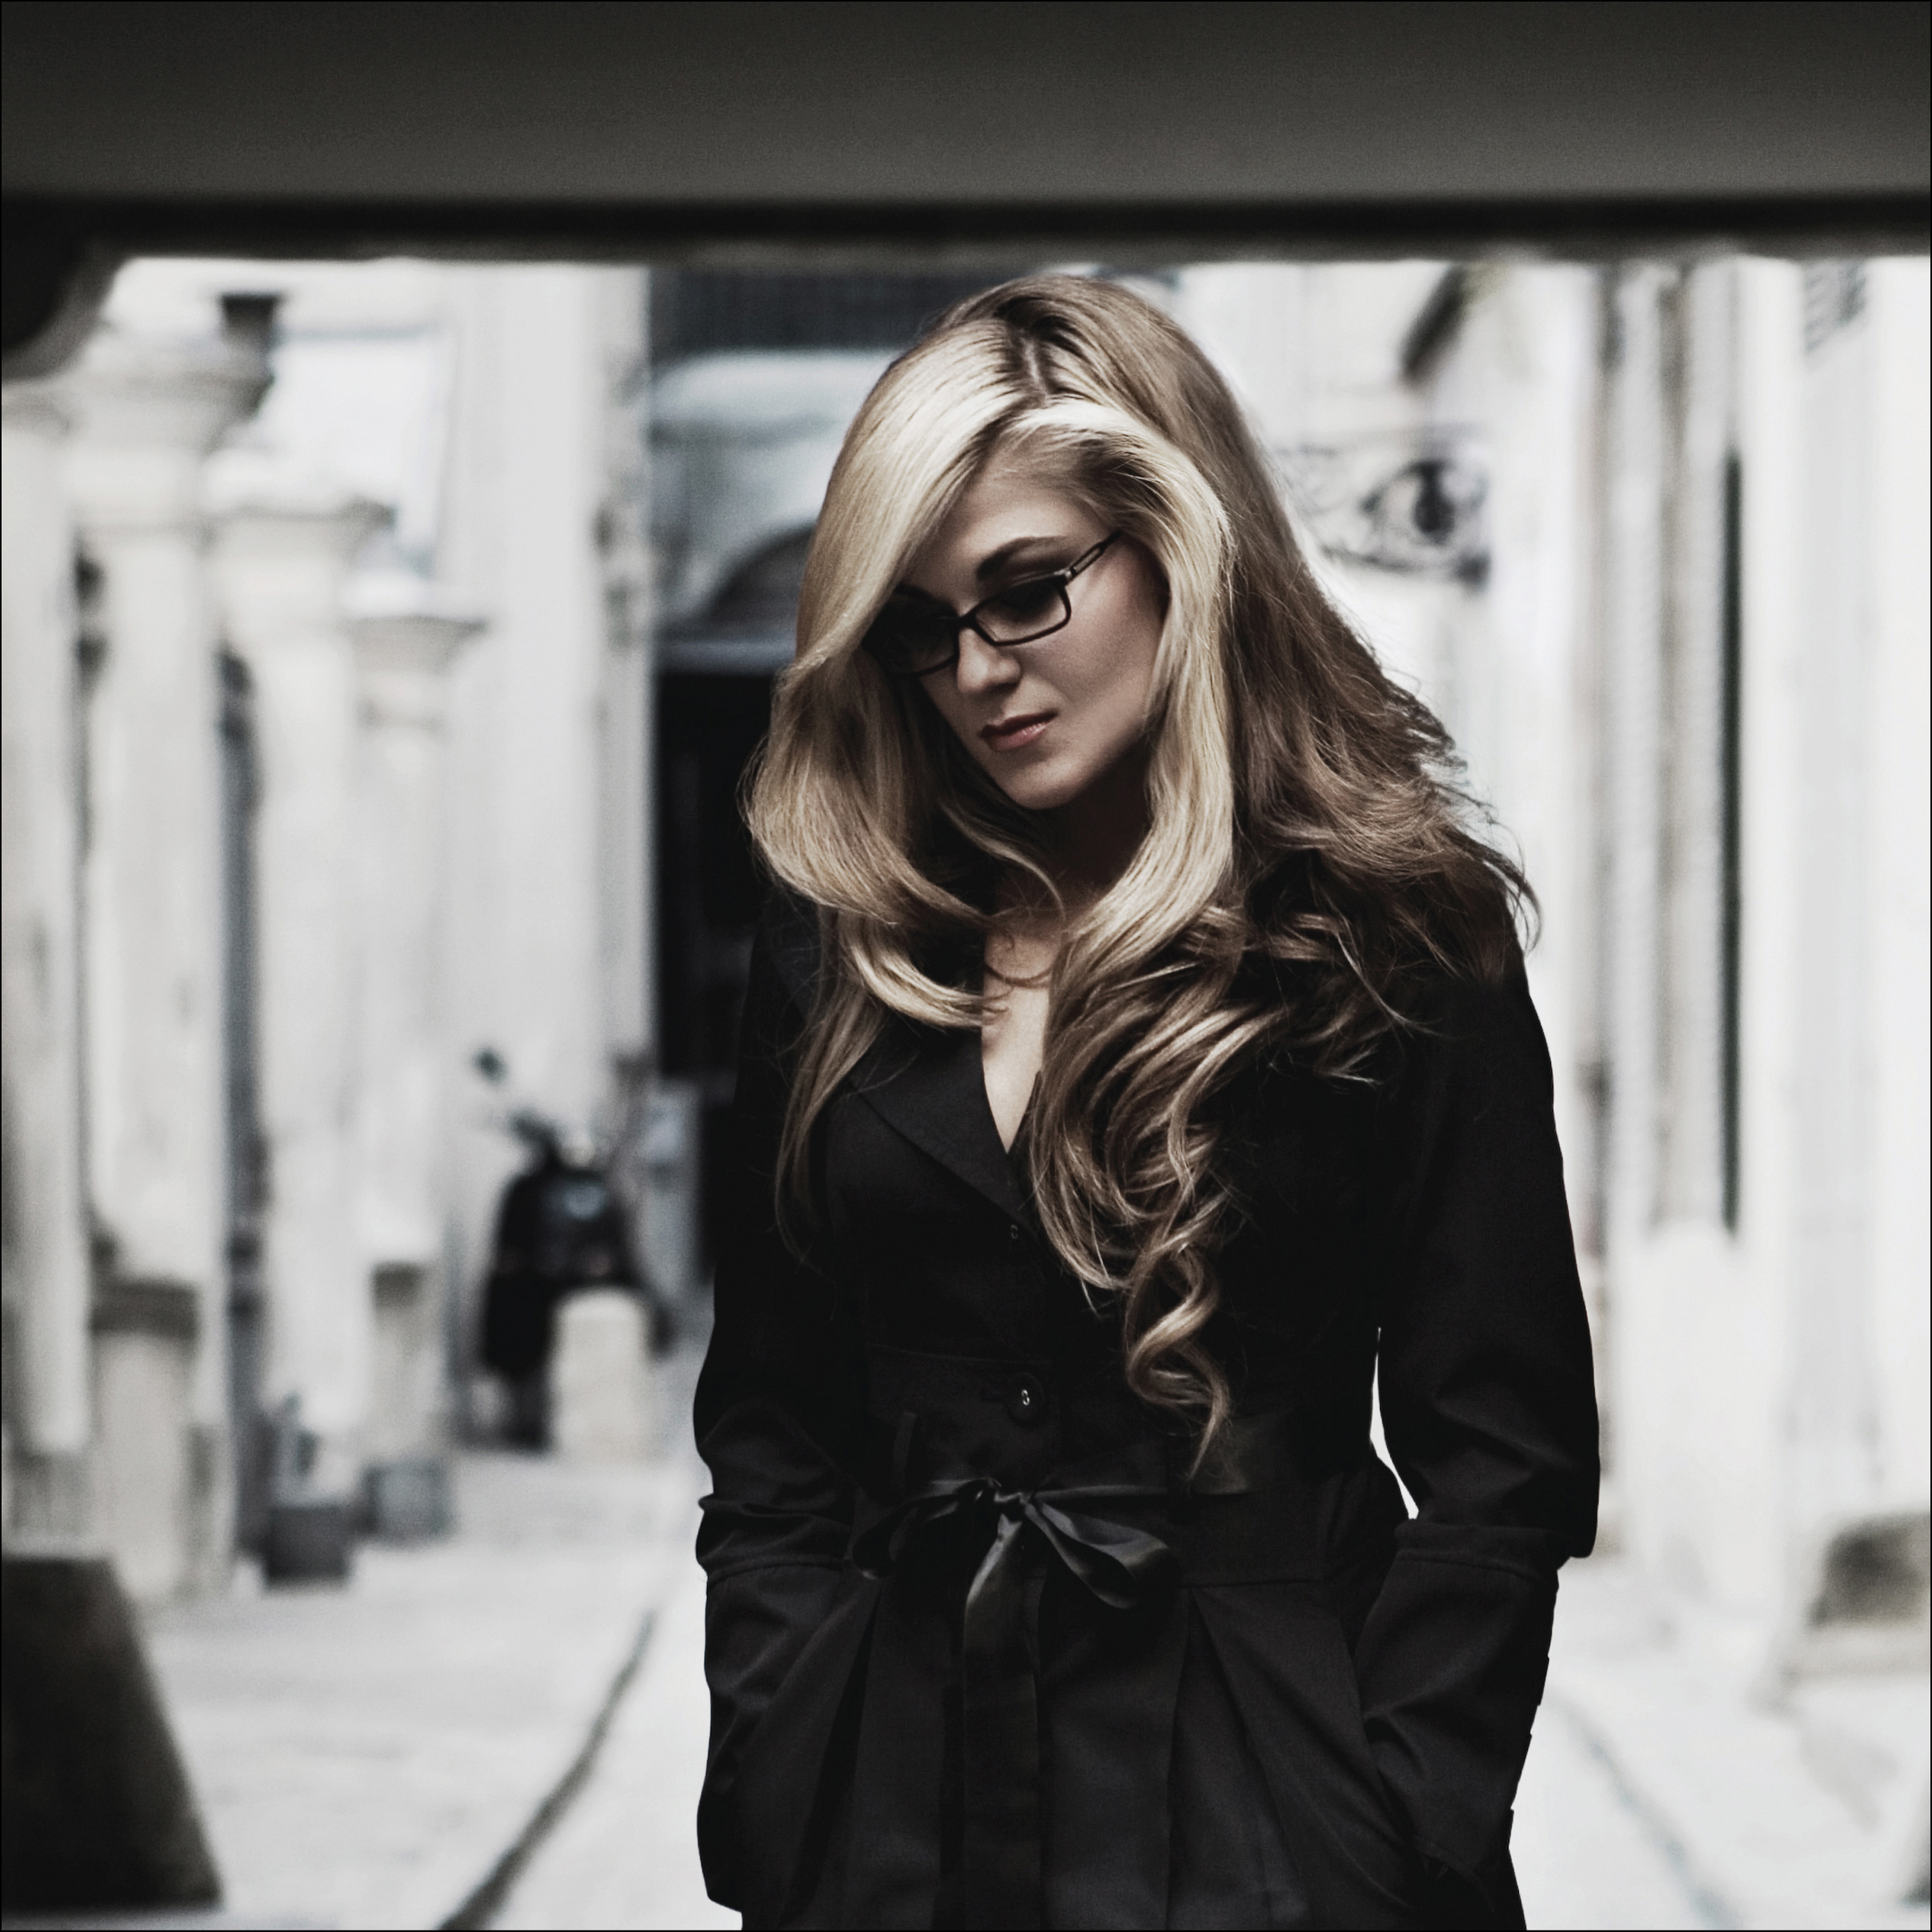 melody gardot my one and only thrill torrent